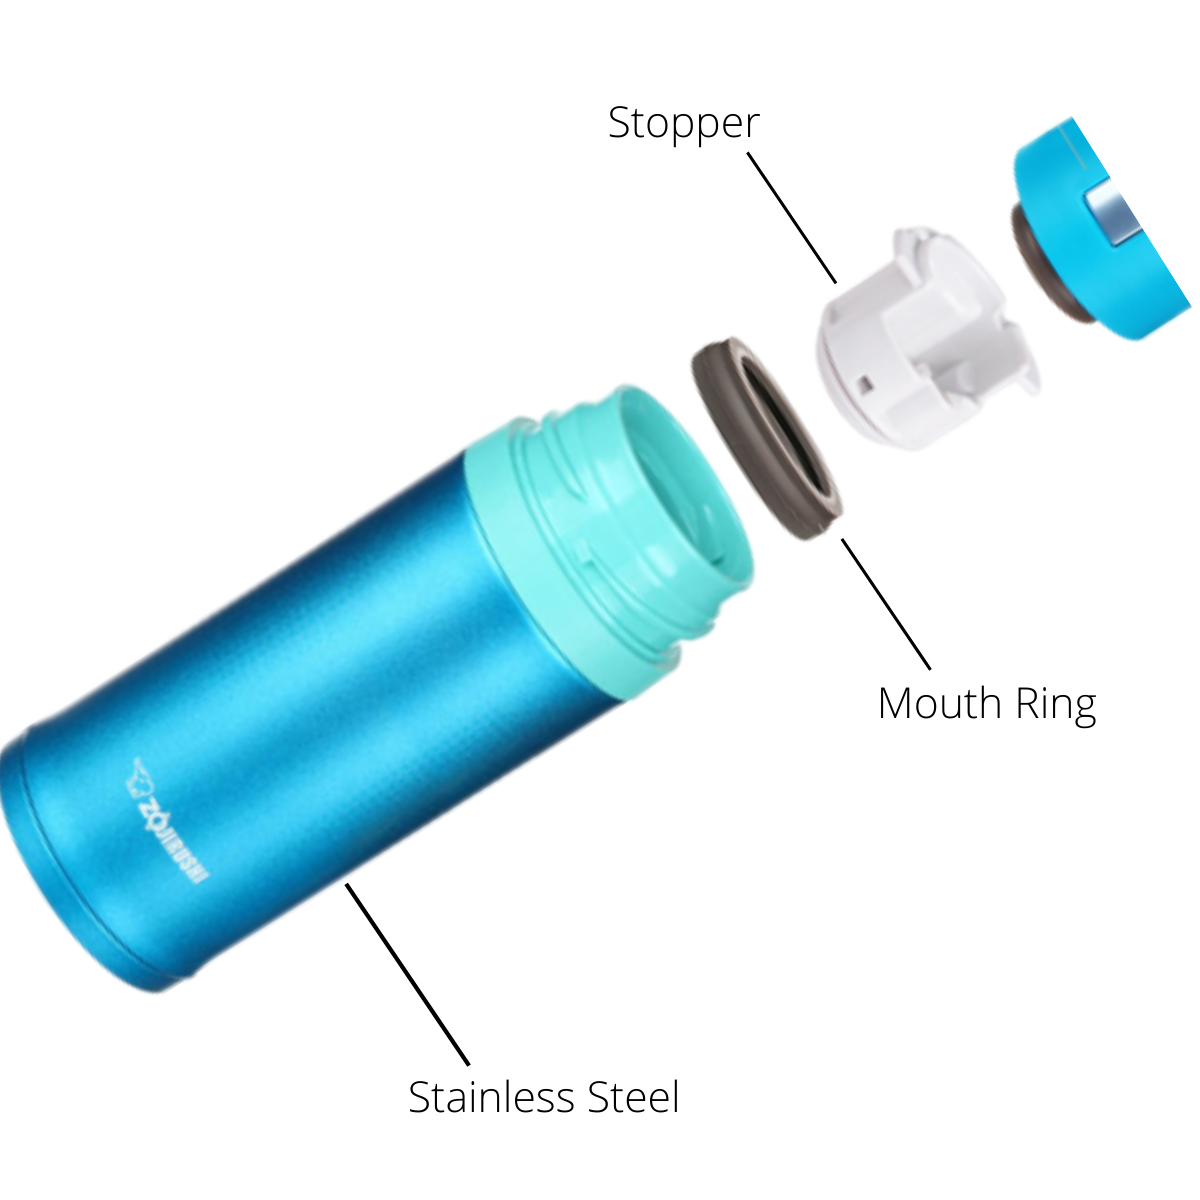 Zojirushi Stainless Steel Vacuum Insulated Bottle 0.36L (SM-XB36-AM)